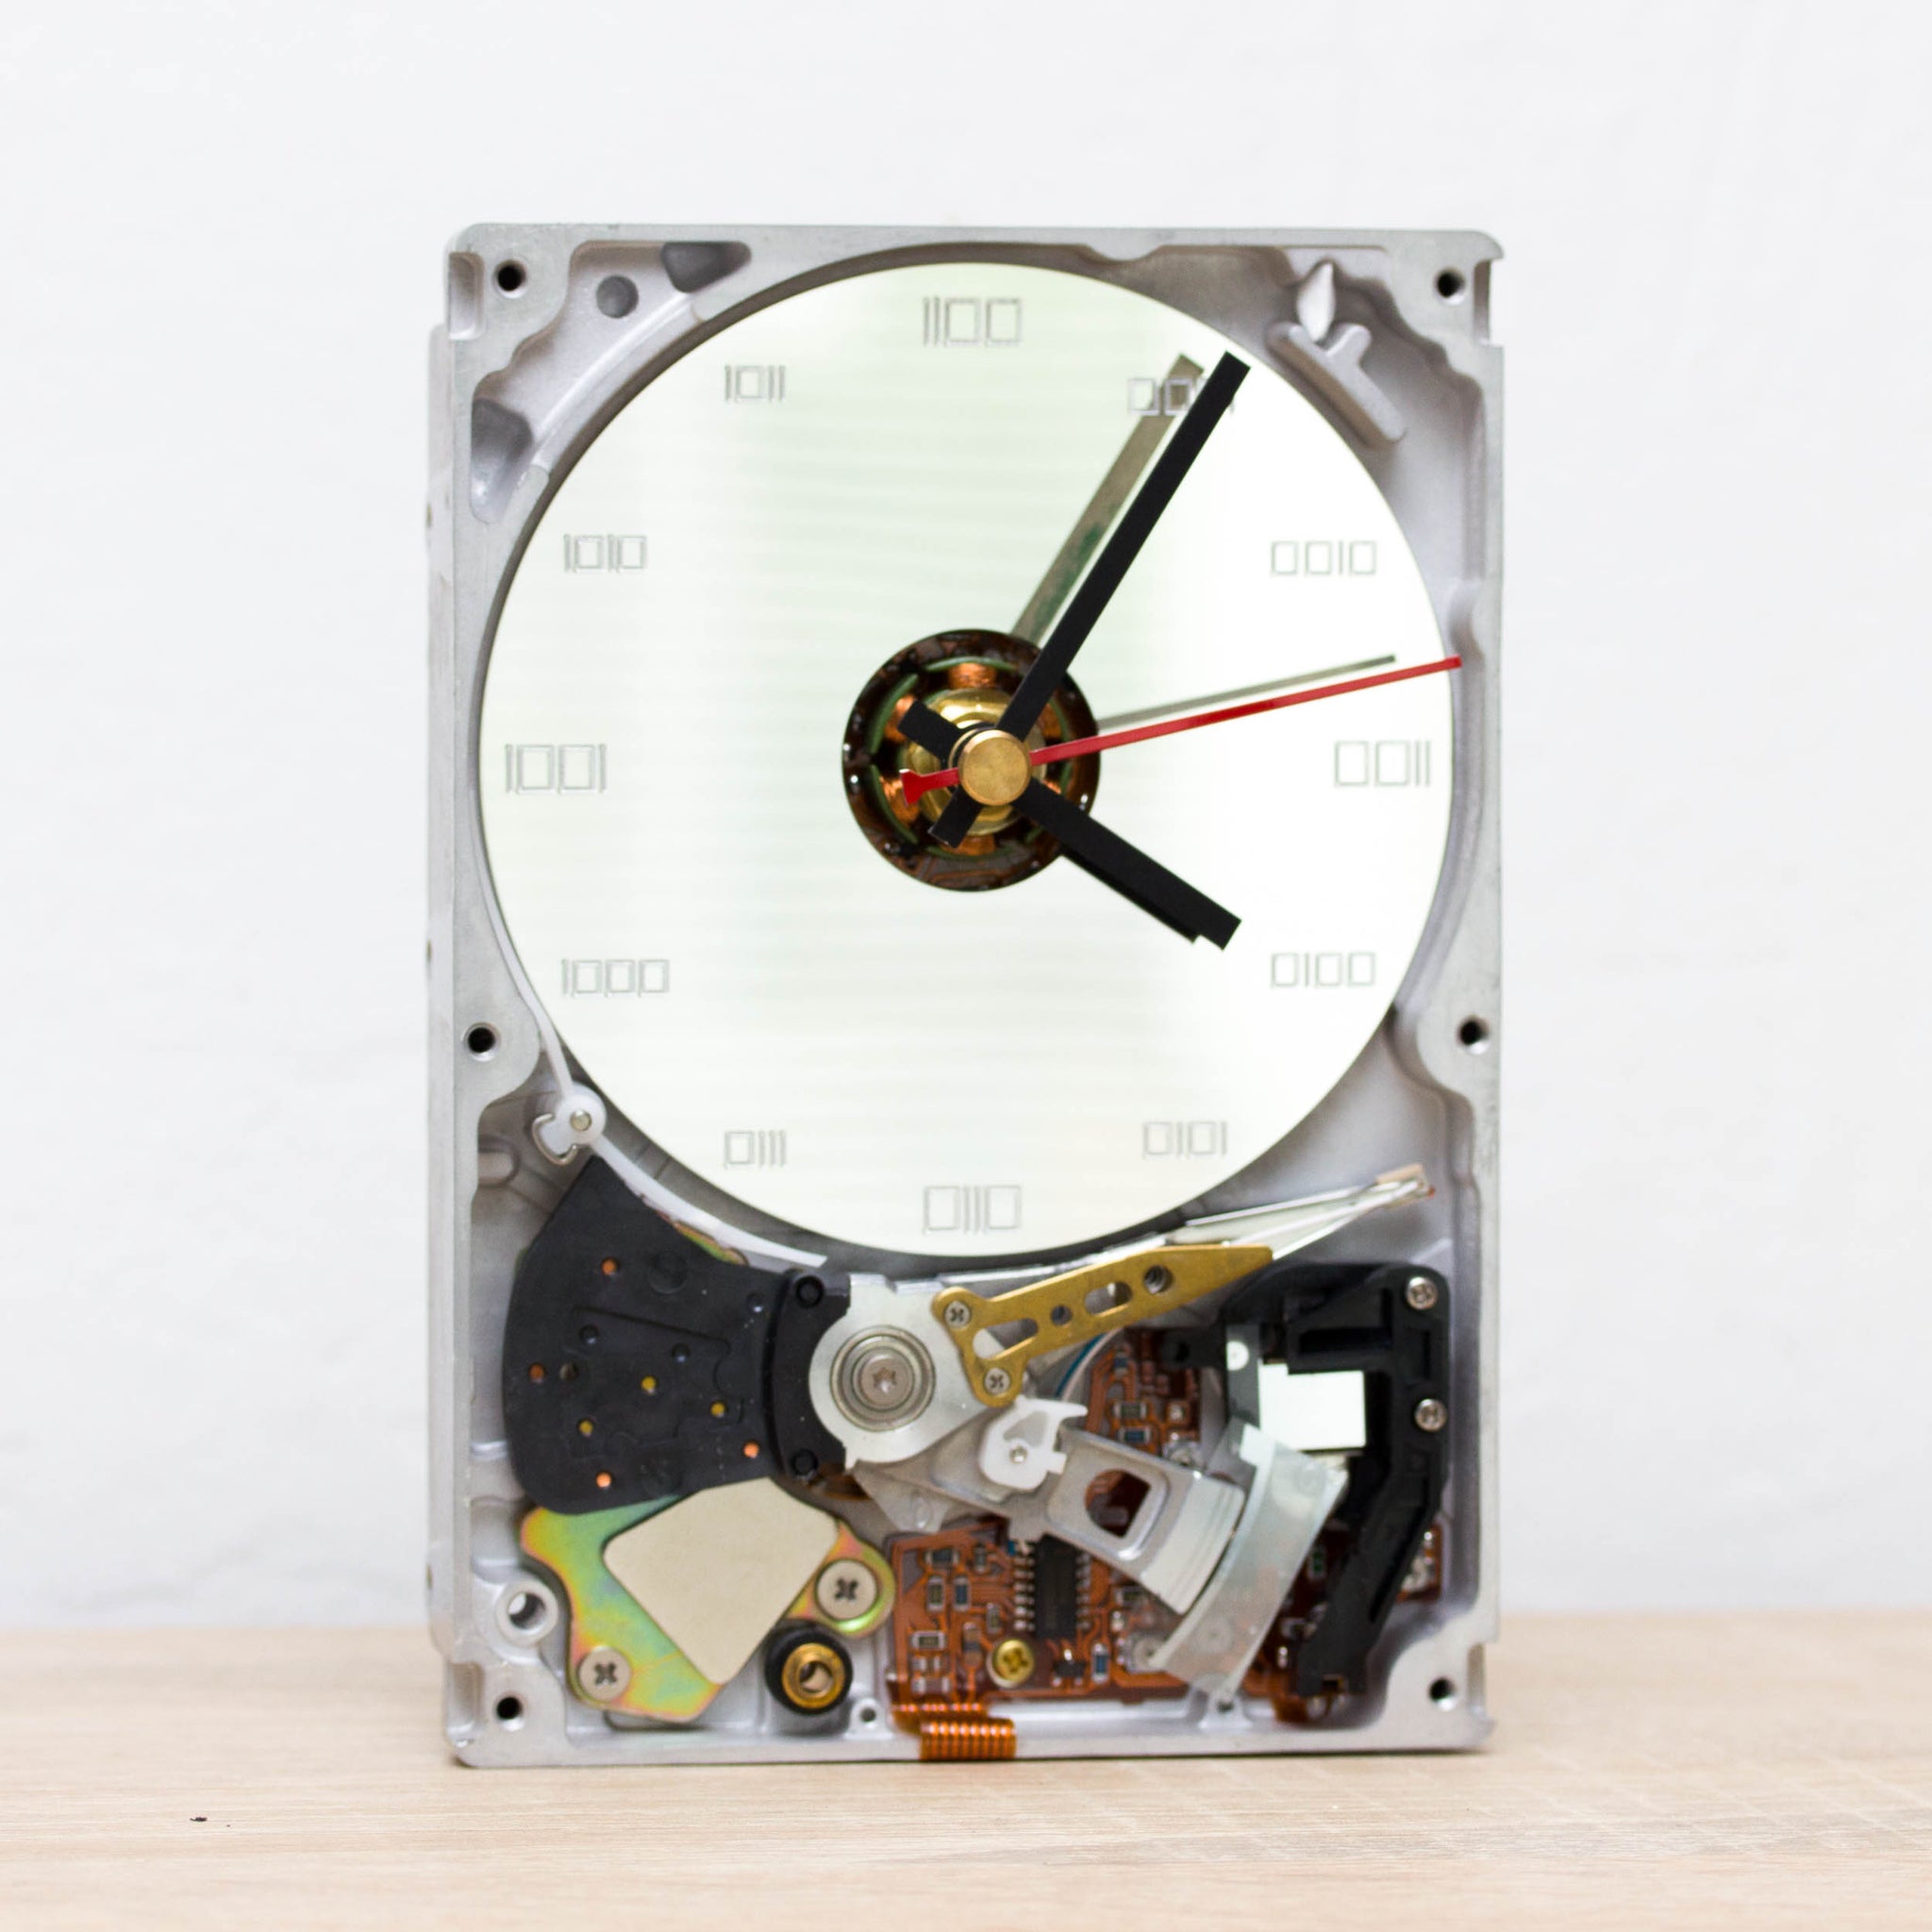 Clock for techie lover made of a recycled HDD